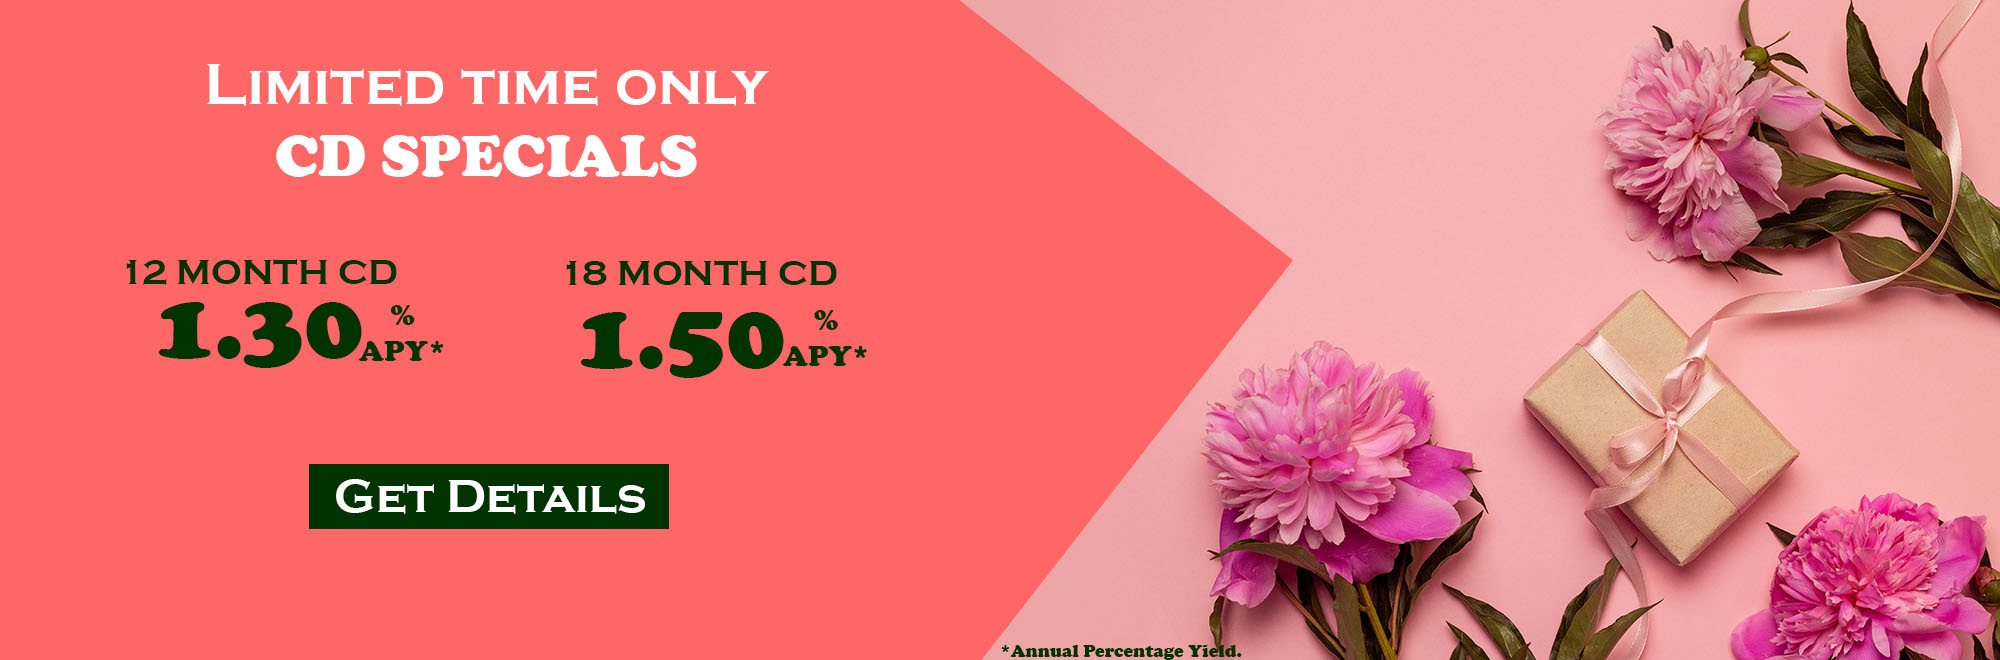 Limited Time Only CD Specials. 12 month CD at 1.30% Annual Percentage Yield and 18 month CD at 1.50% Annual Percentag Yield. Get Details.